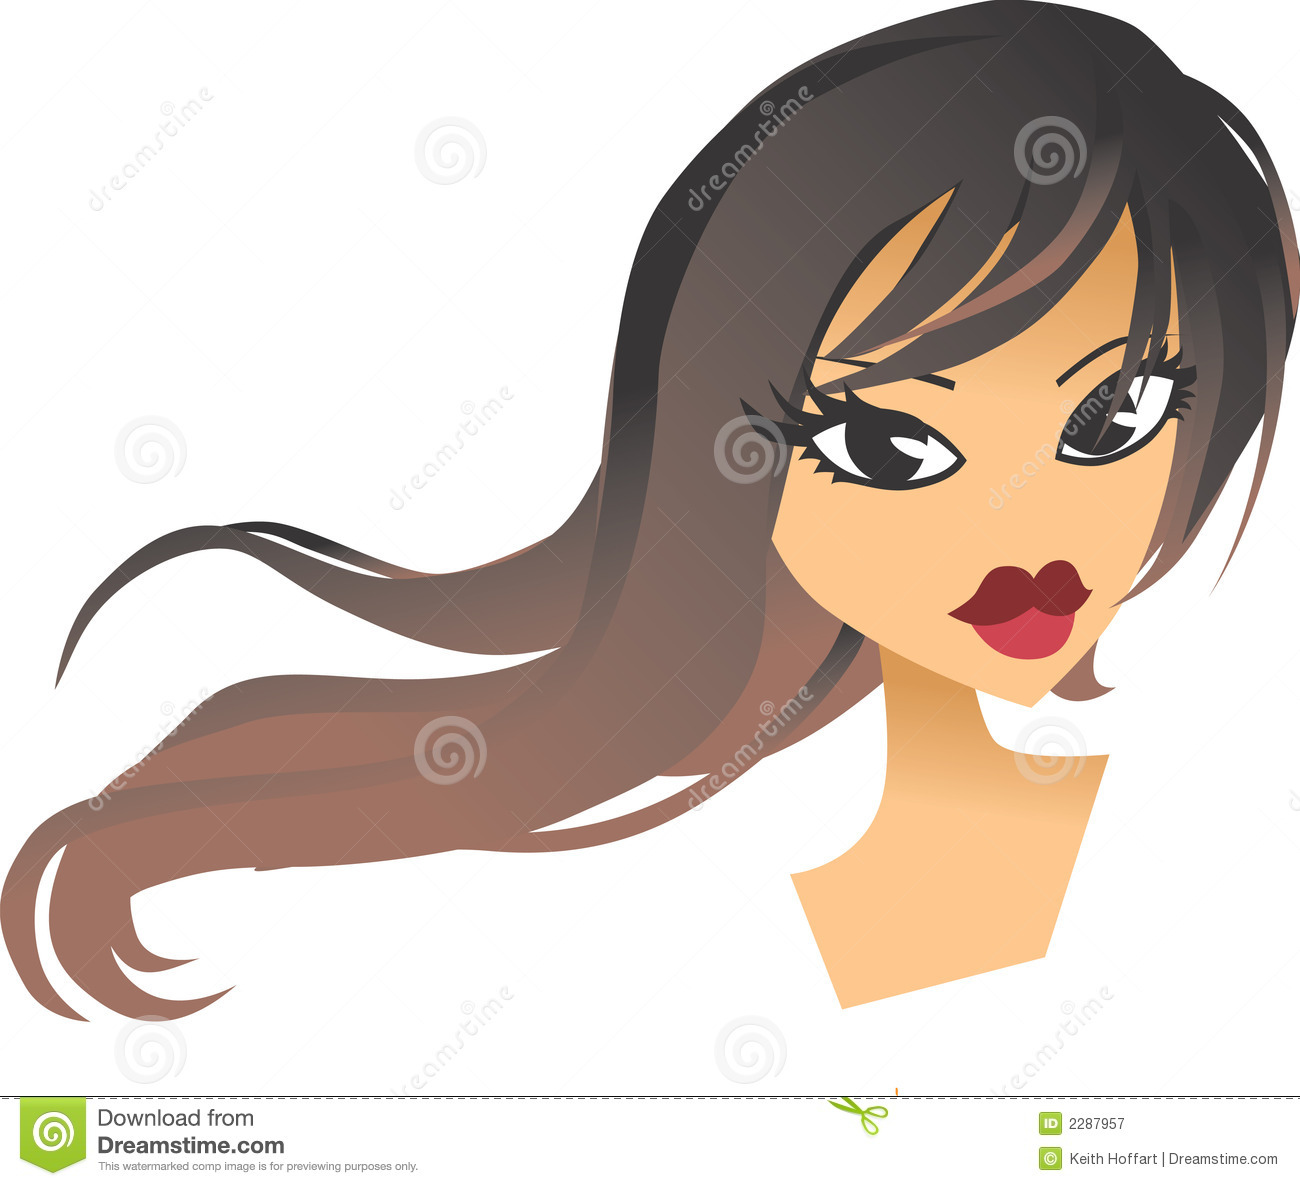 Lady Head Clip Art Royalty Free Stock Photography   Image  2287957